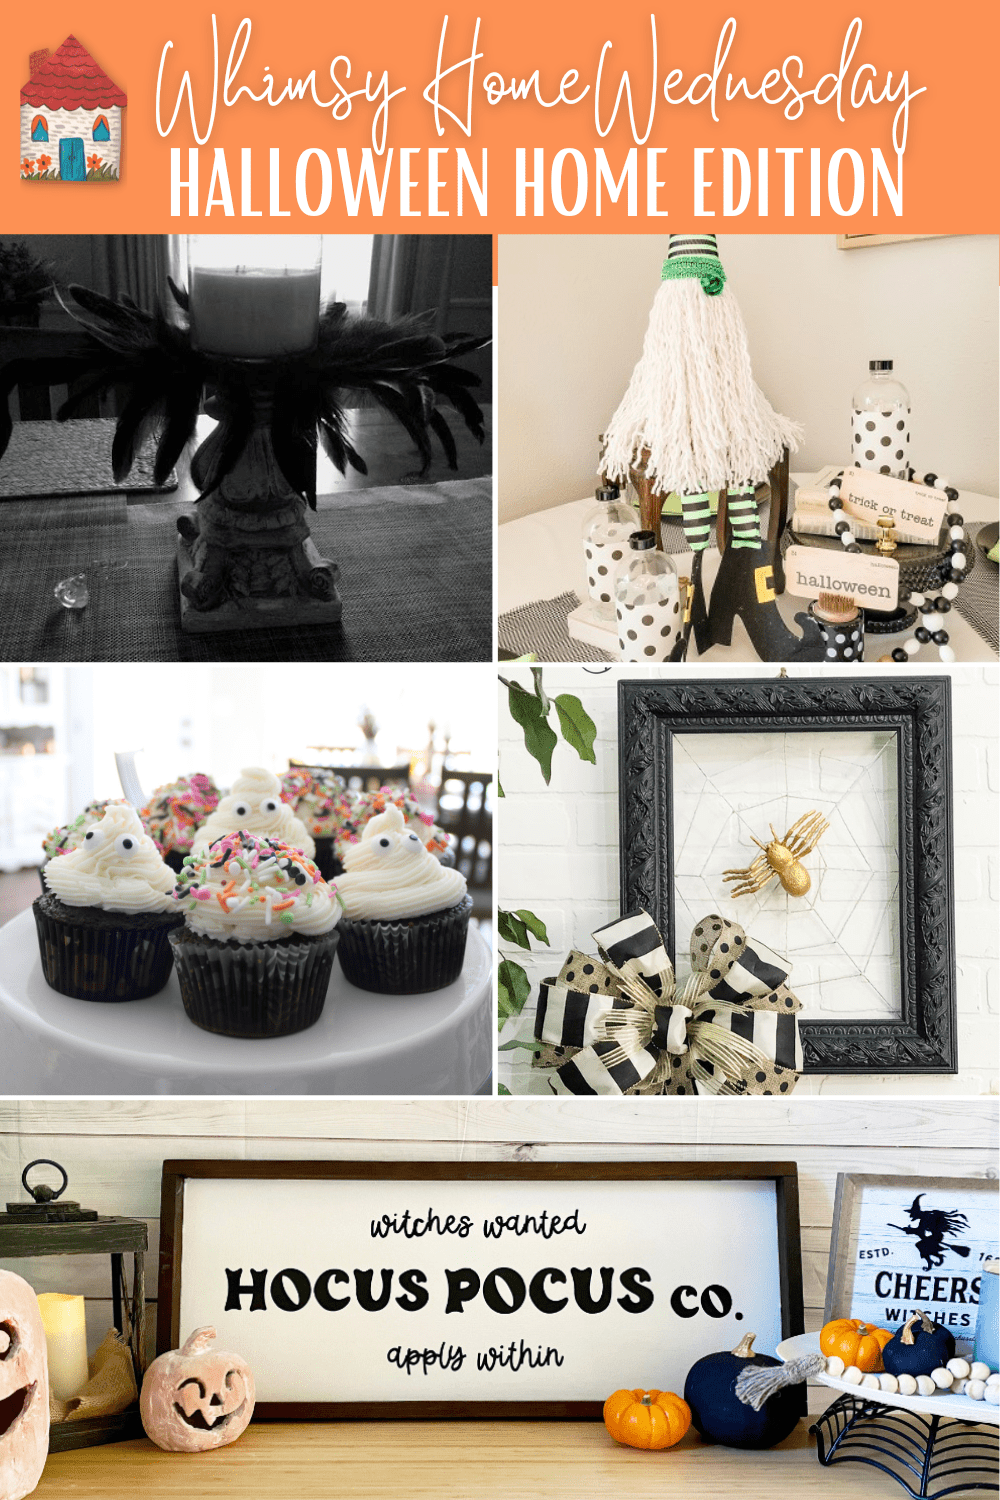 Whimsy Home Wednesday #1 – Whimsical Halloween Home